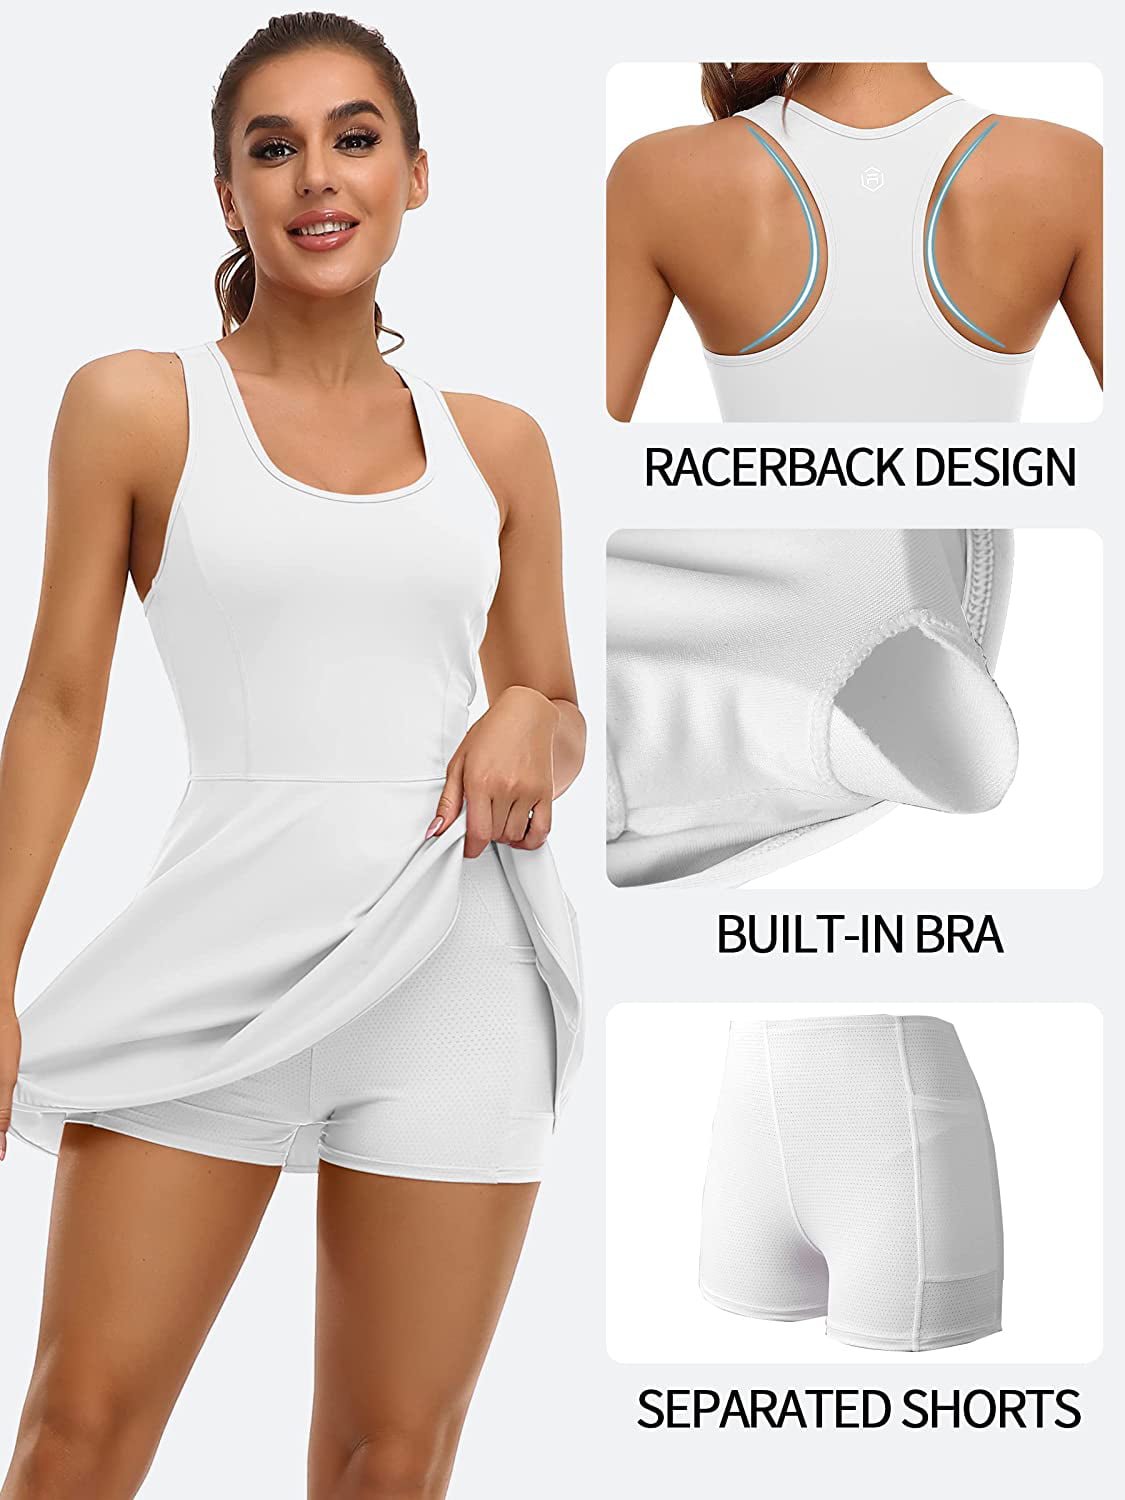 Tennis Dress for Women Workout Dress with Built-in Bra & Shorts Pockets Athletic  Dress for Exercise Golf Dresses 